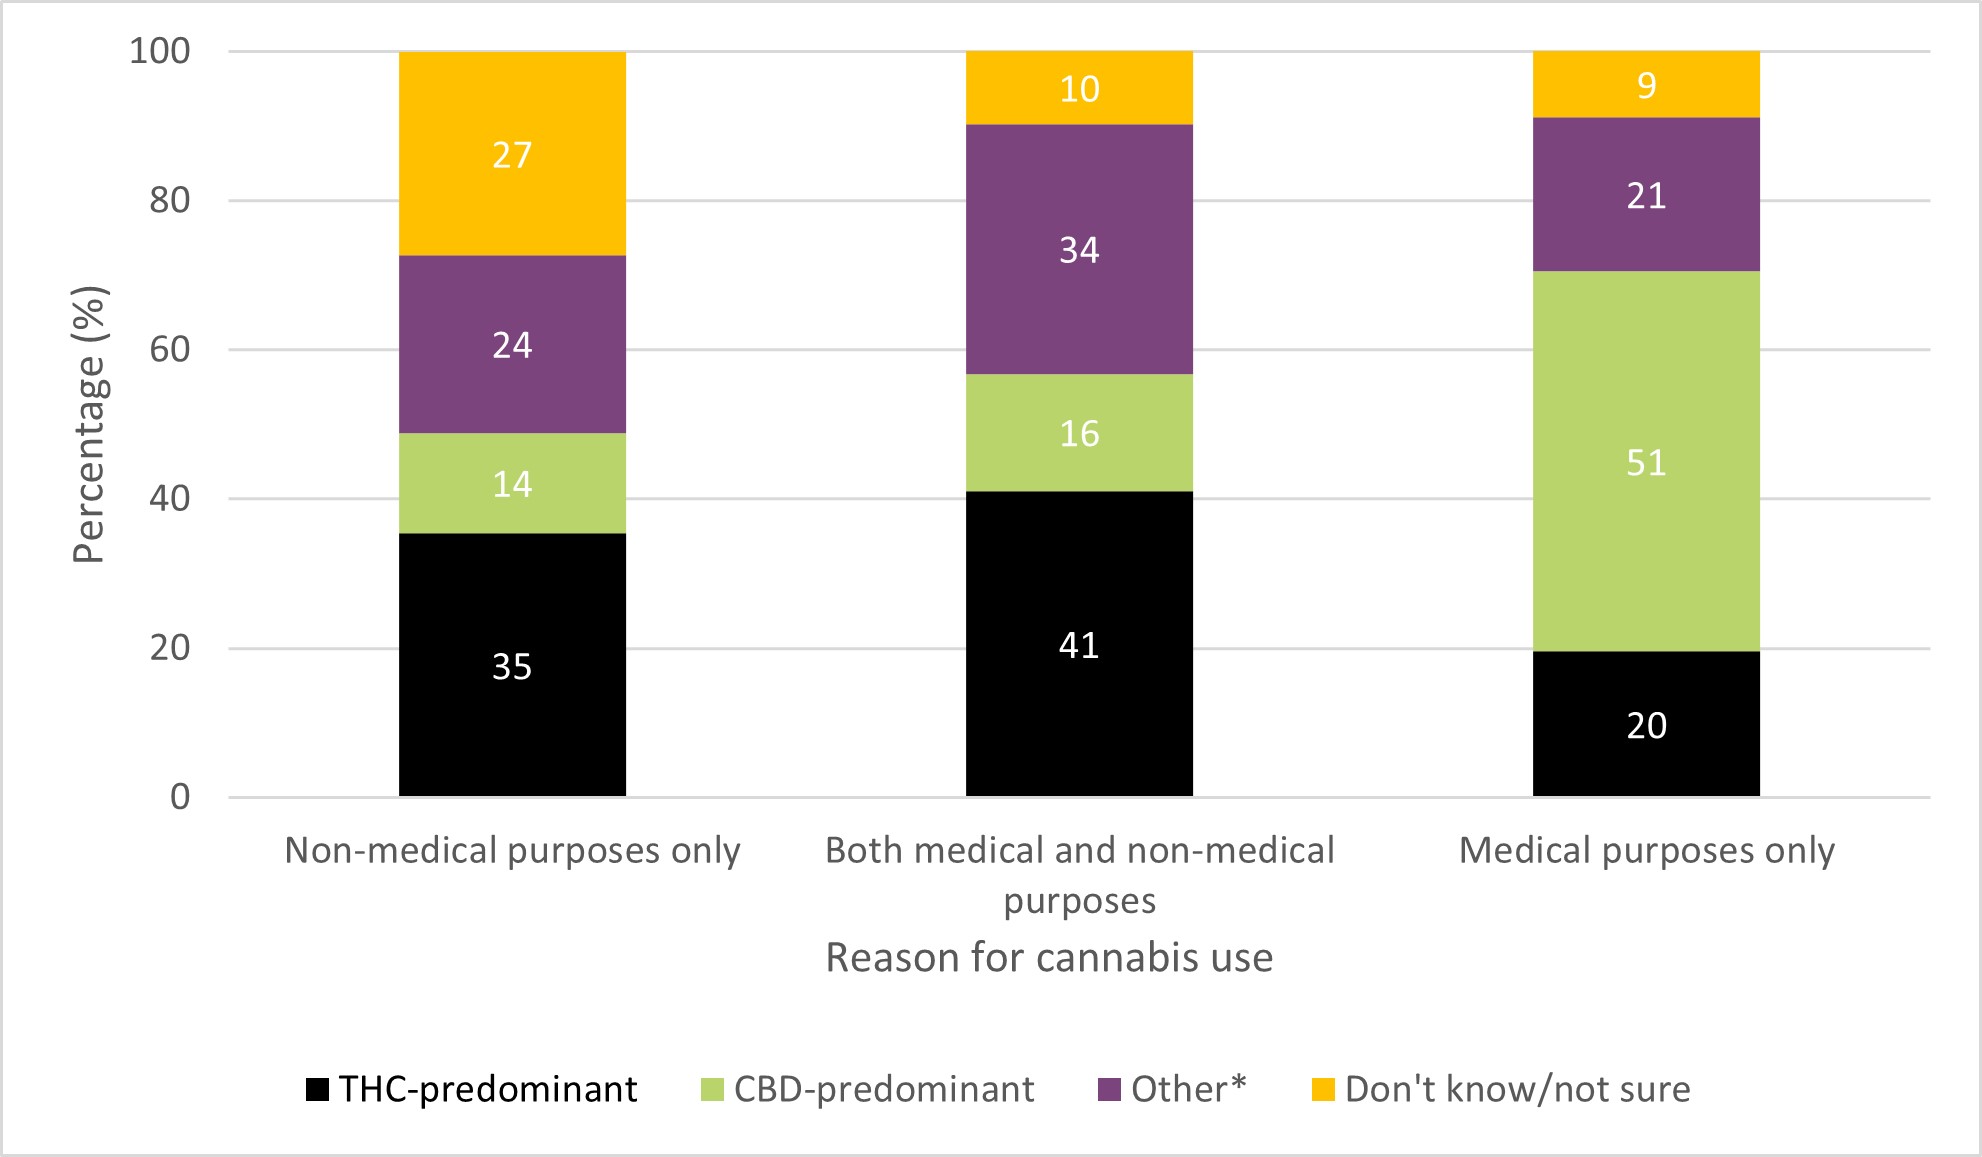 Figure 12: Usual THC and CBD levels of cannabis products used among those who used cannabis in the past 12 months, by reason for cannabis use. Text description follows.